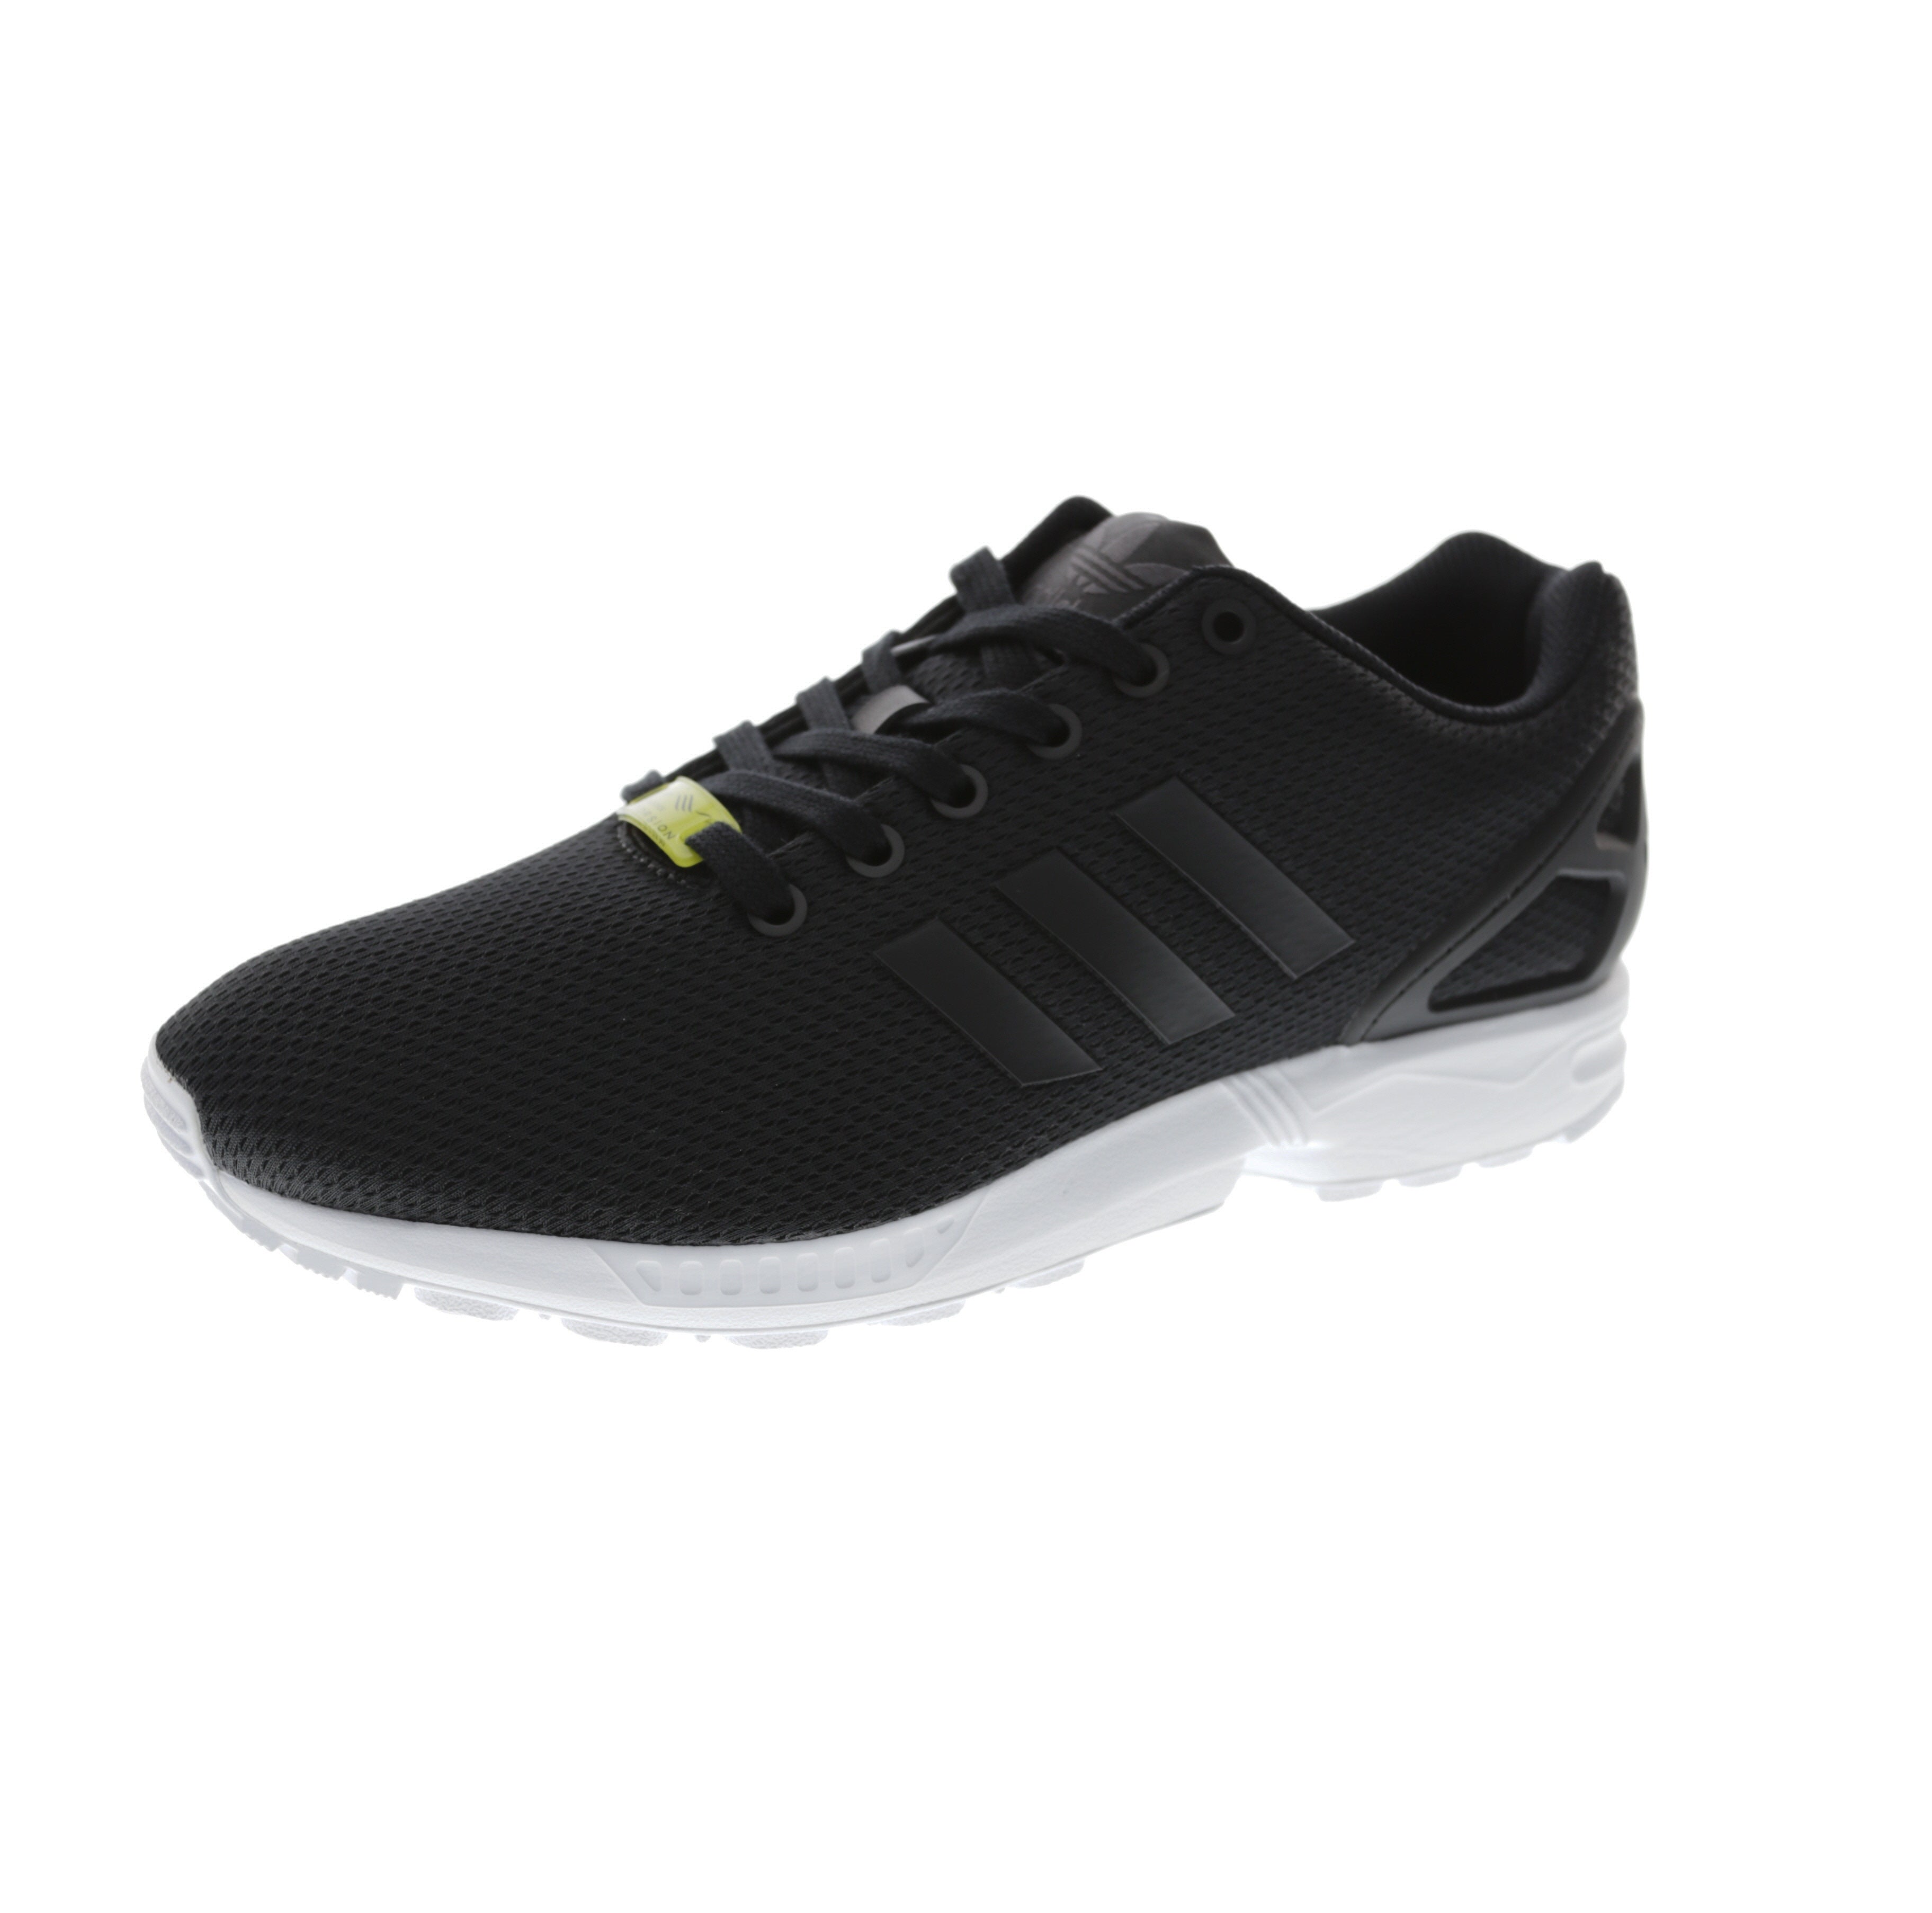 Adidas Zx Flux Black Outfit Flash Sales, 57% OFF 